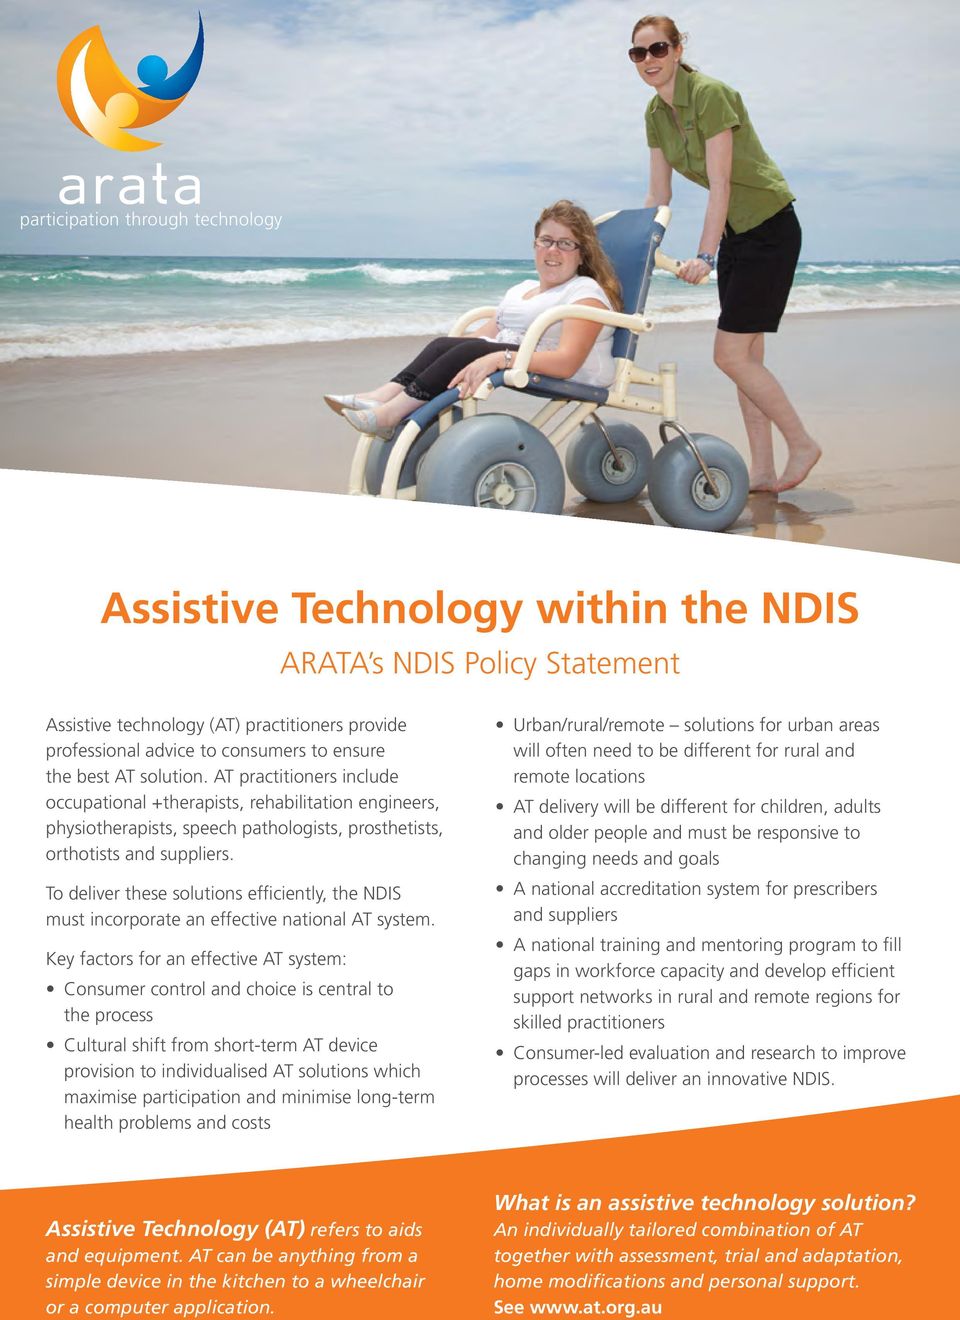 To deliver these solutions efficiently, the NDIS must incorporate an effective national AT system.